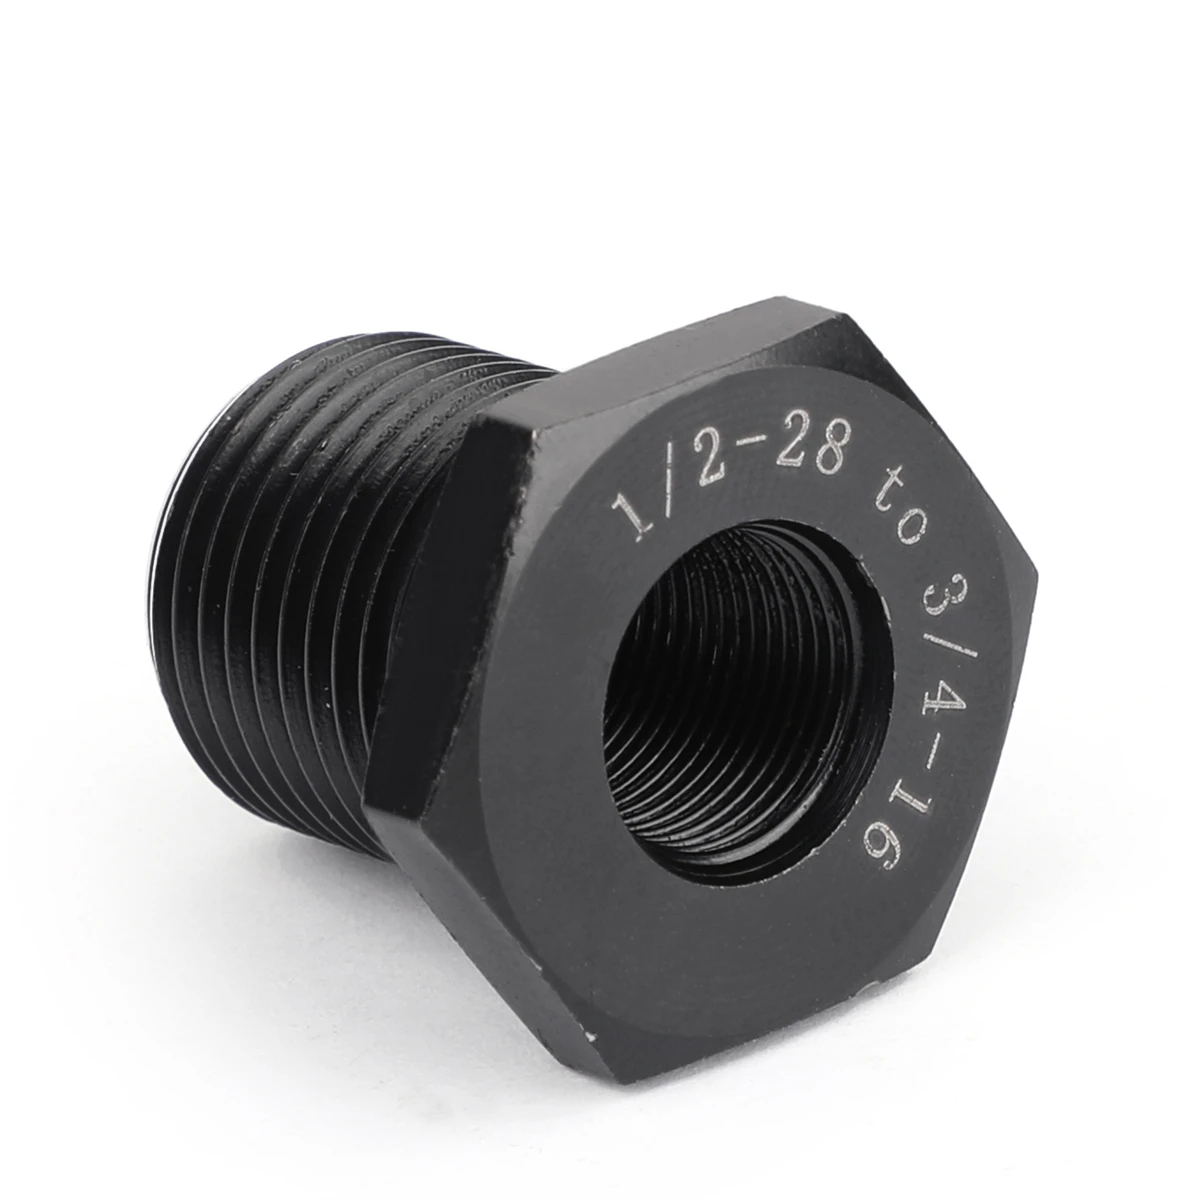 

Areyourshop 1/2-28 To 3/4-16 Oil Filter Threaded Adapter Stronger Than Aluminum